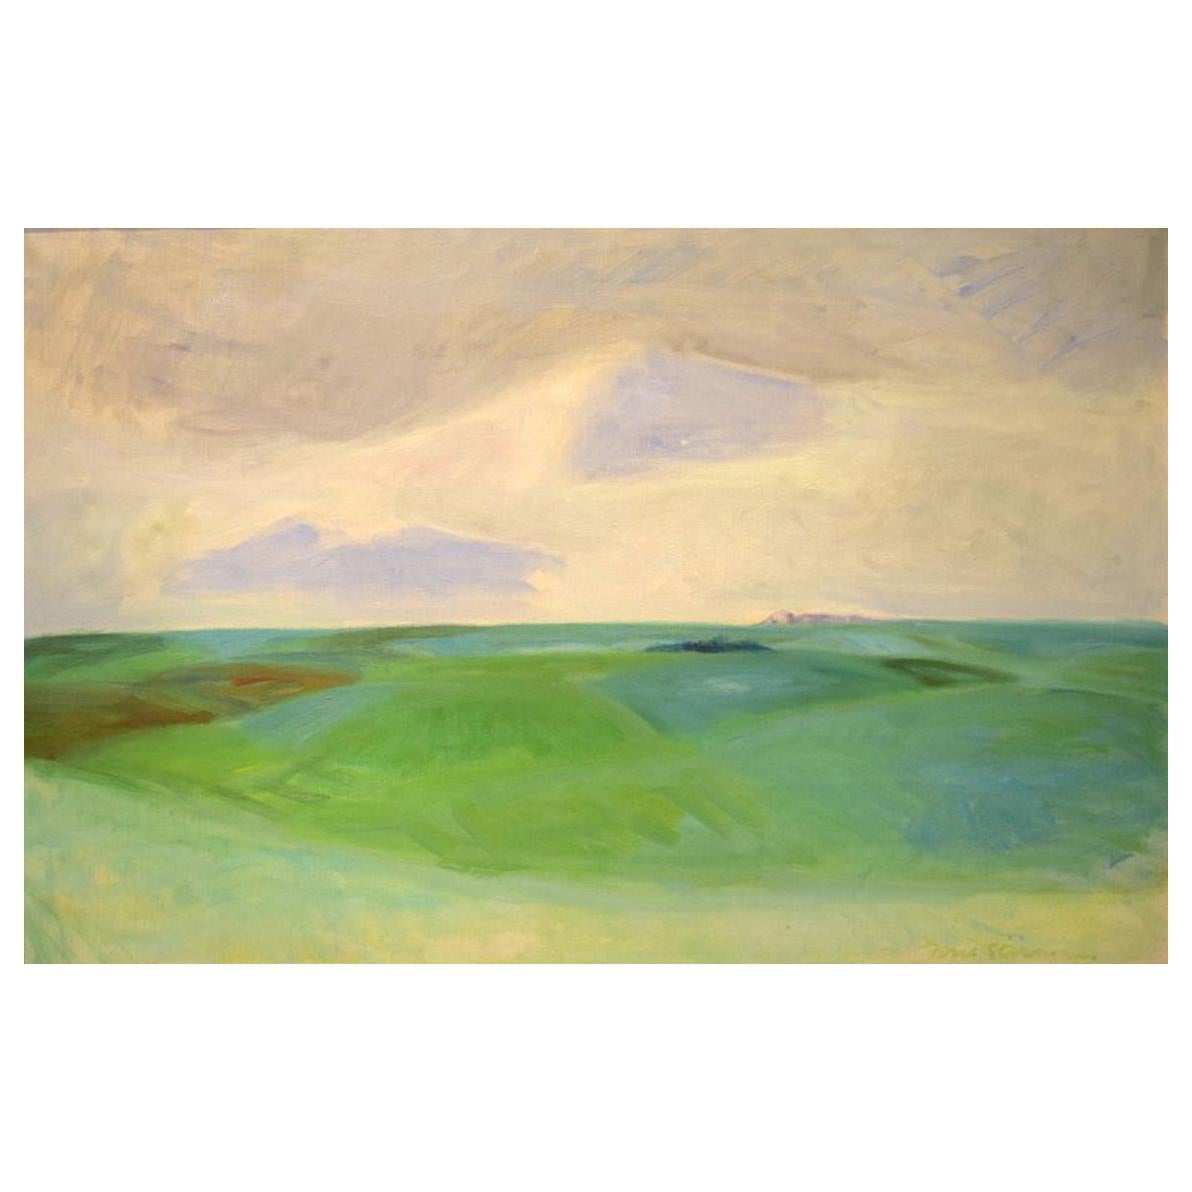 Poul Sørensen, Oil on Canvas, 1940s, Landscape from North Zealand